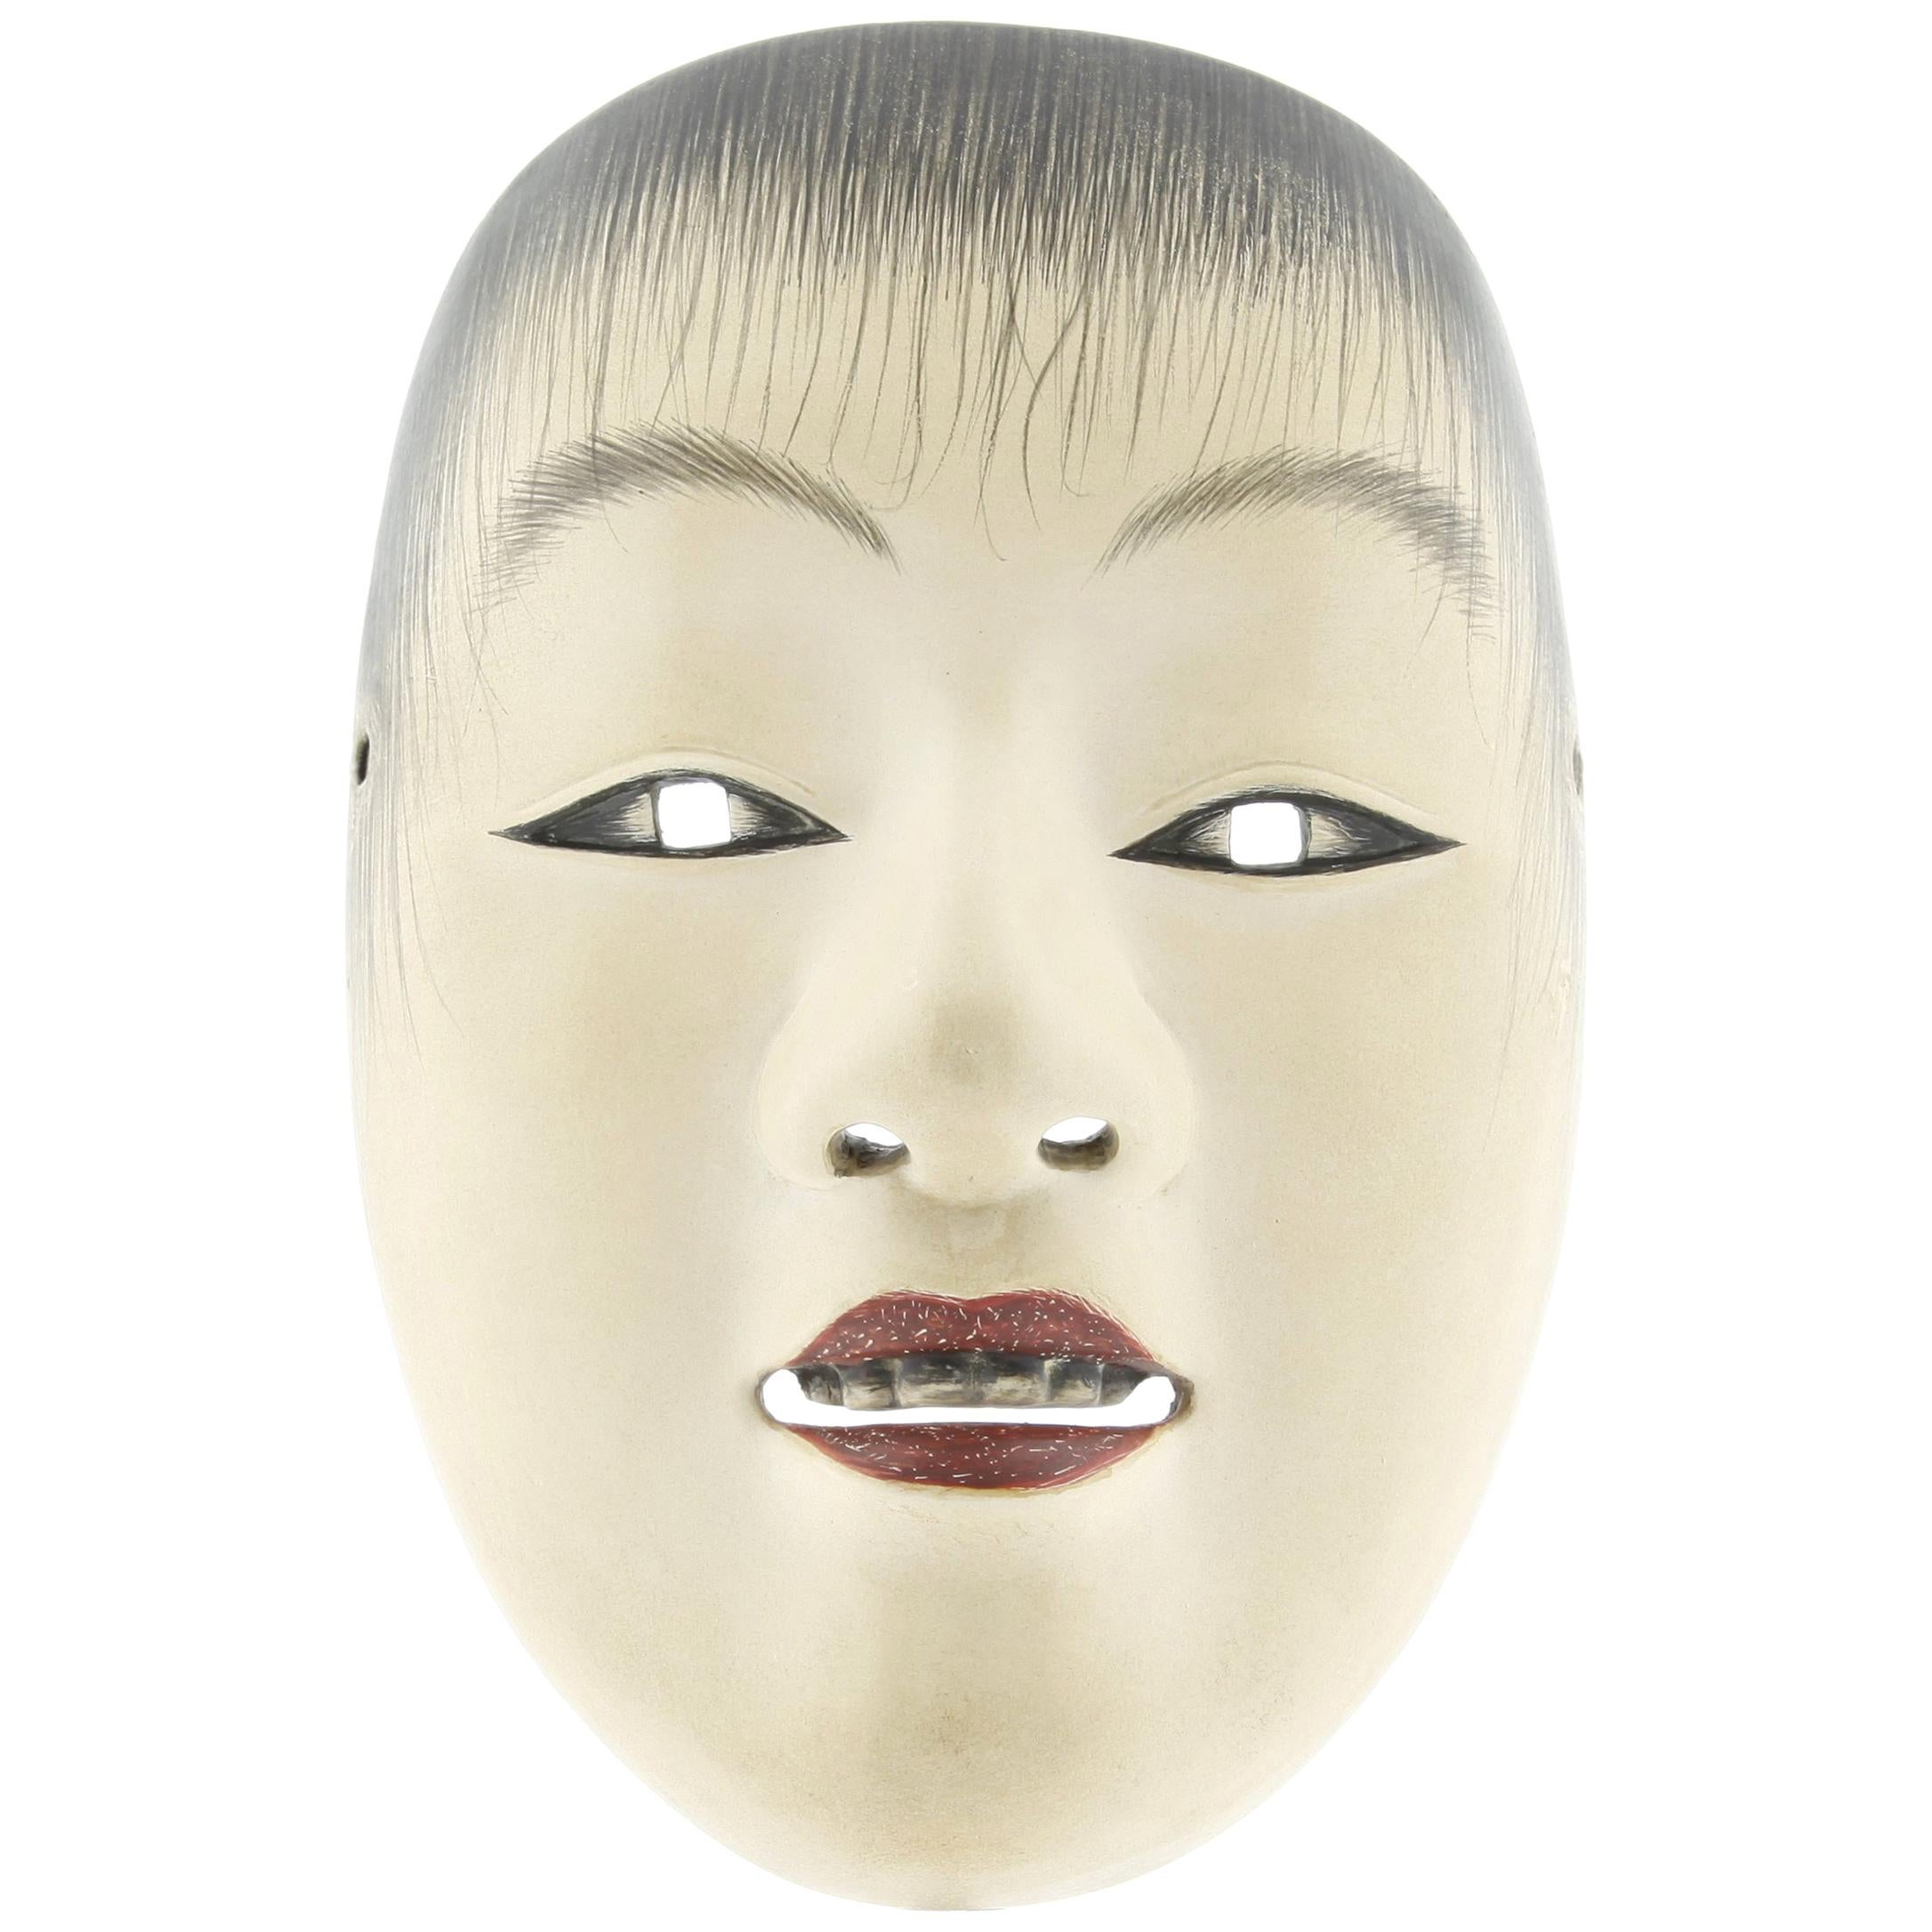 Noh Mask of a Young Boy, Actor, Japanese Theatre, Drama, 19th Century, Woodcraft For Sale